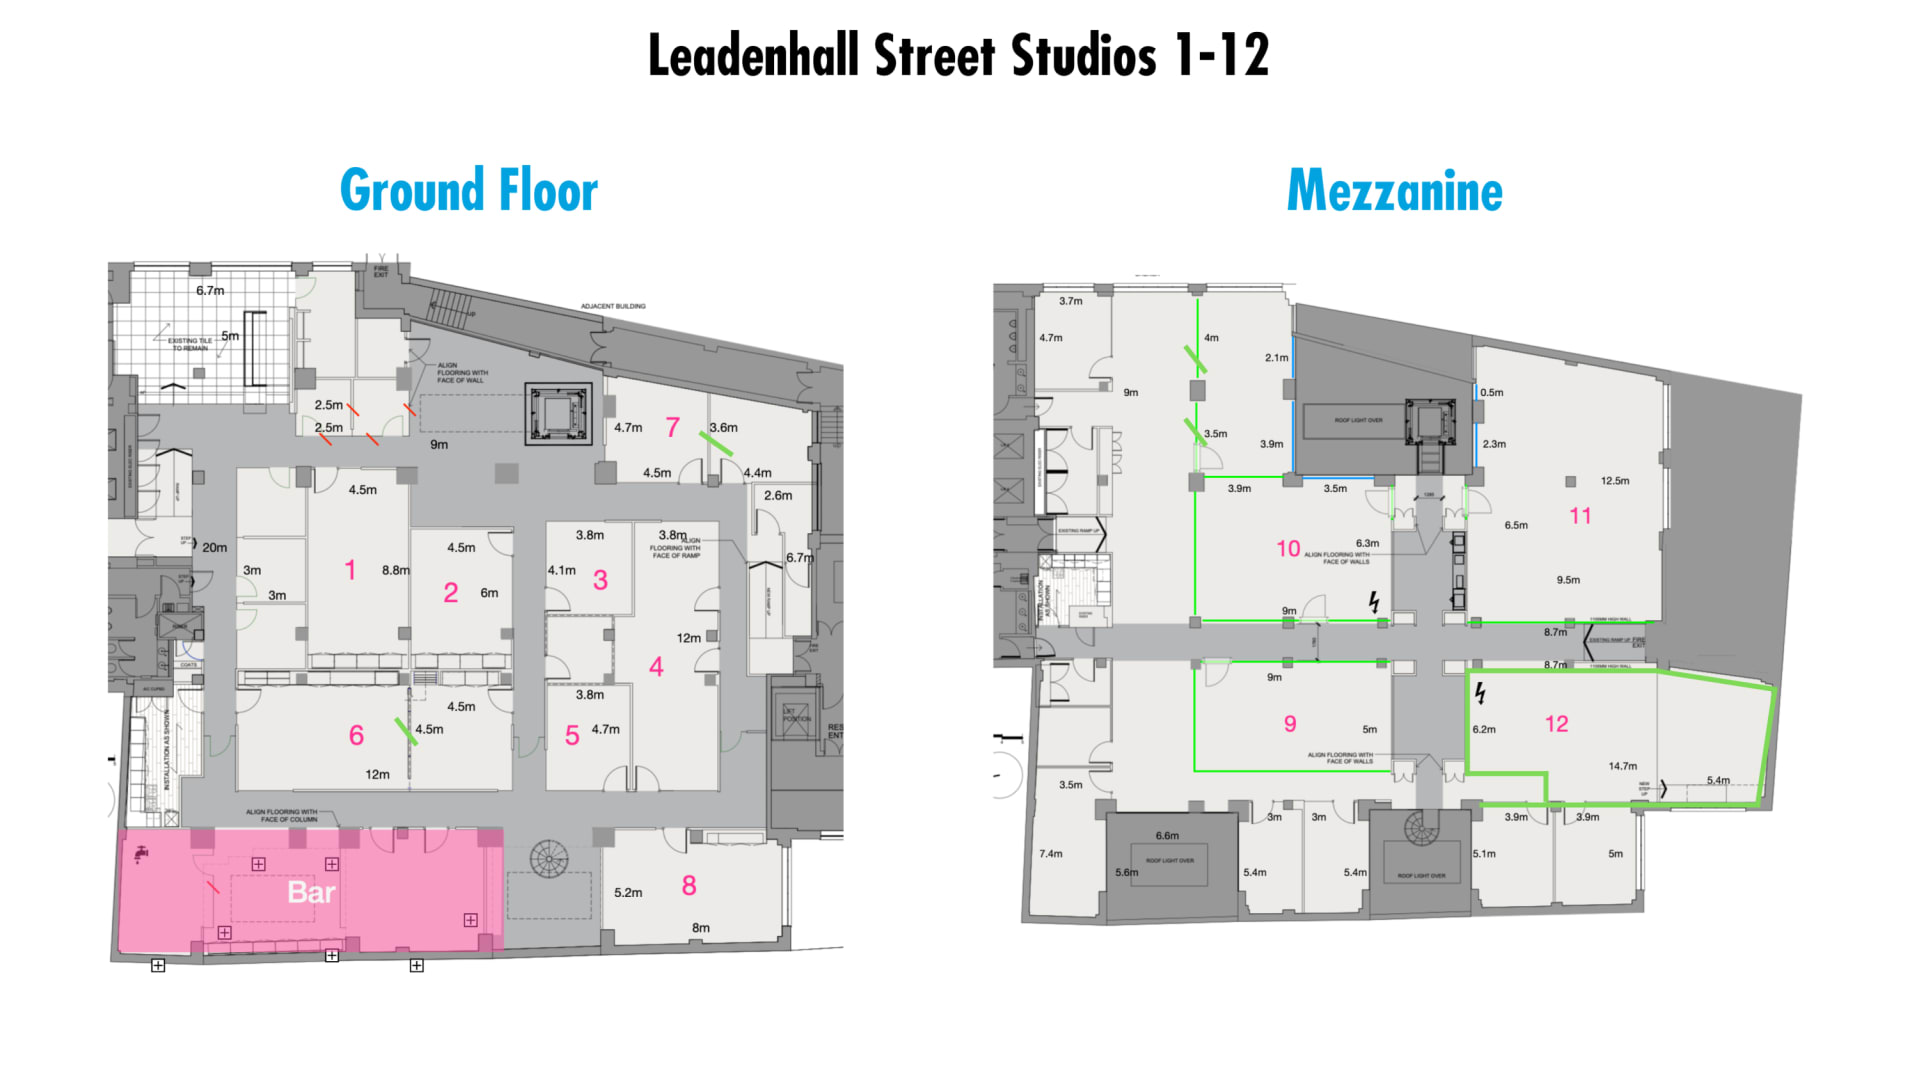 Plan of the new venue showing all the studios and other rooms